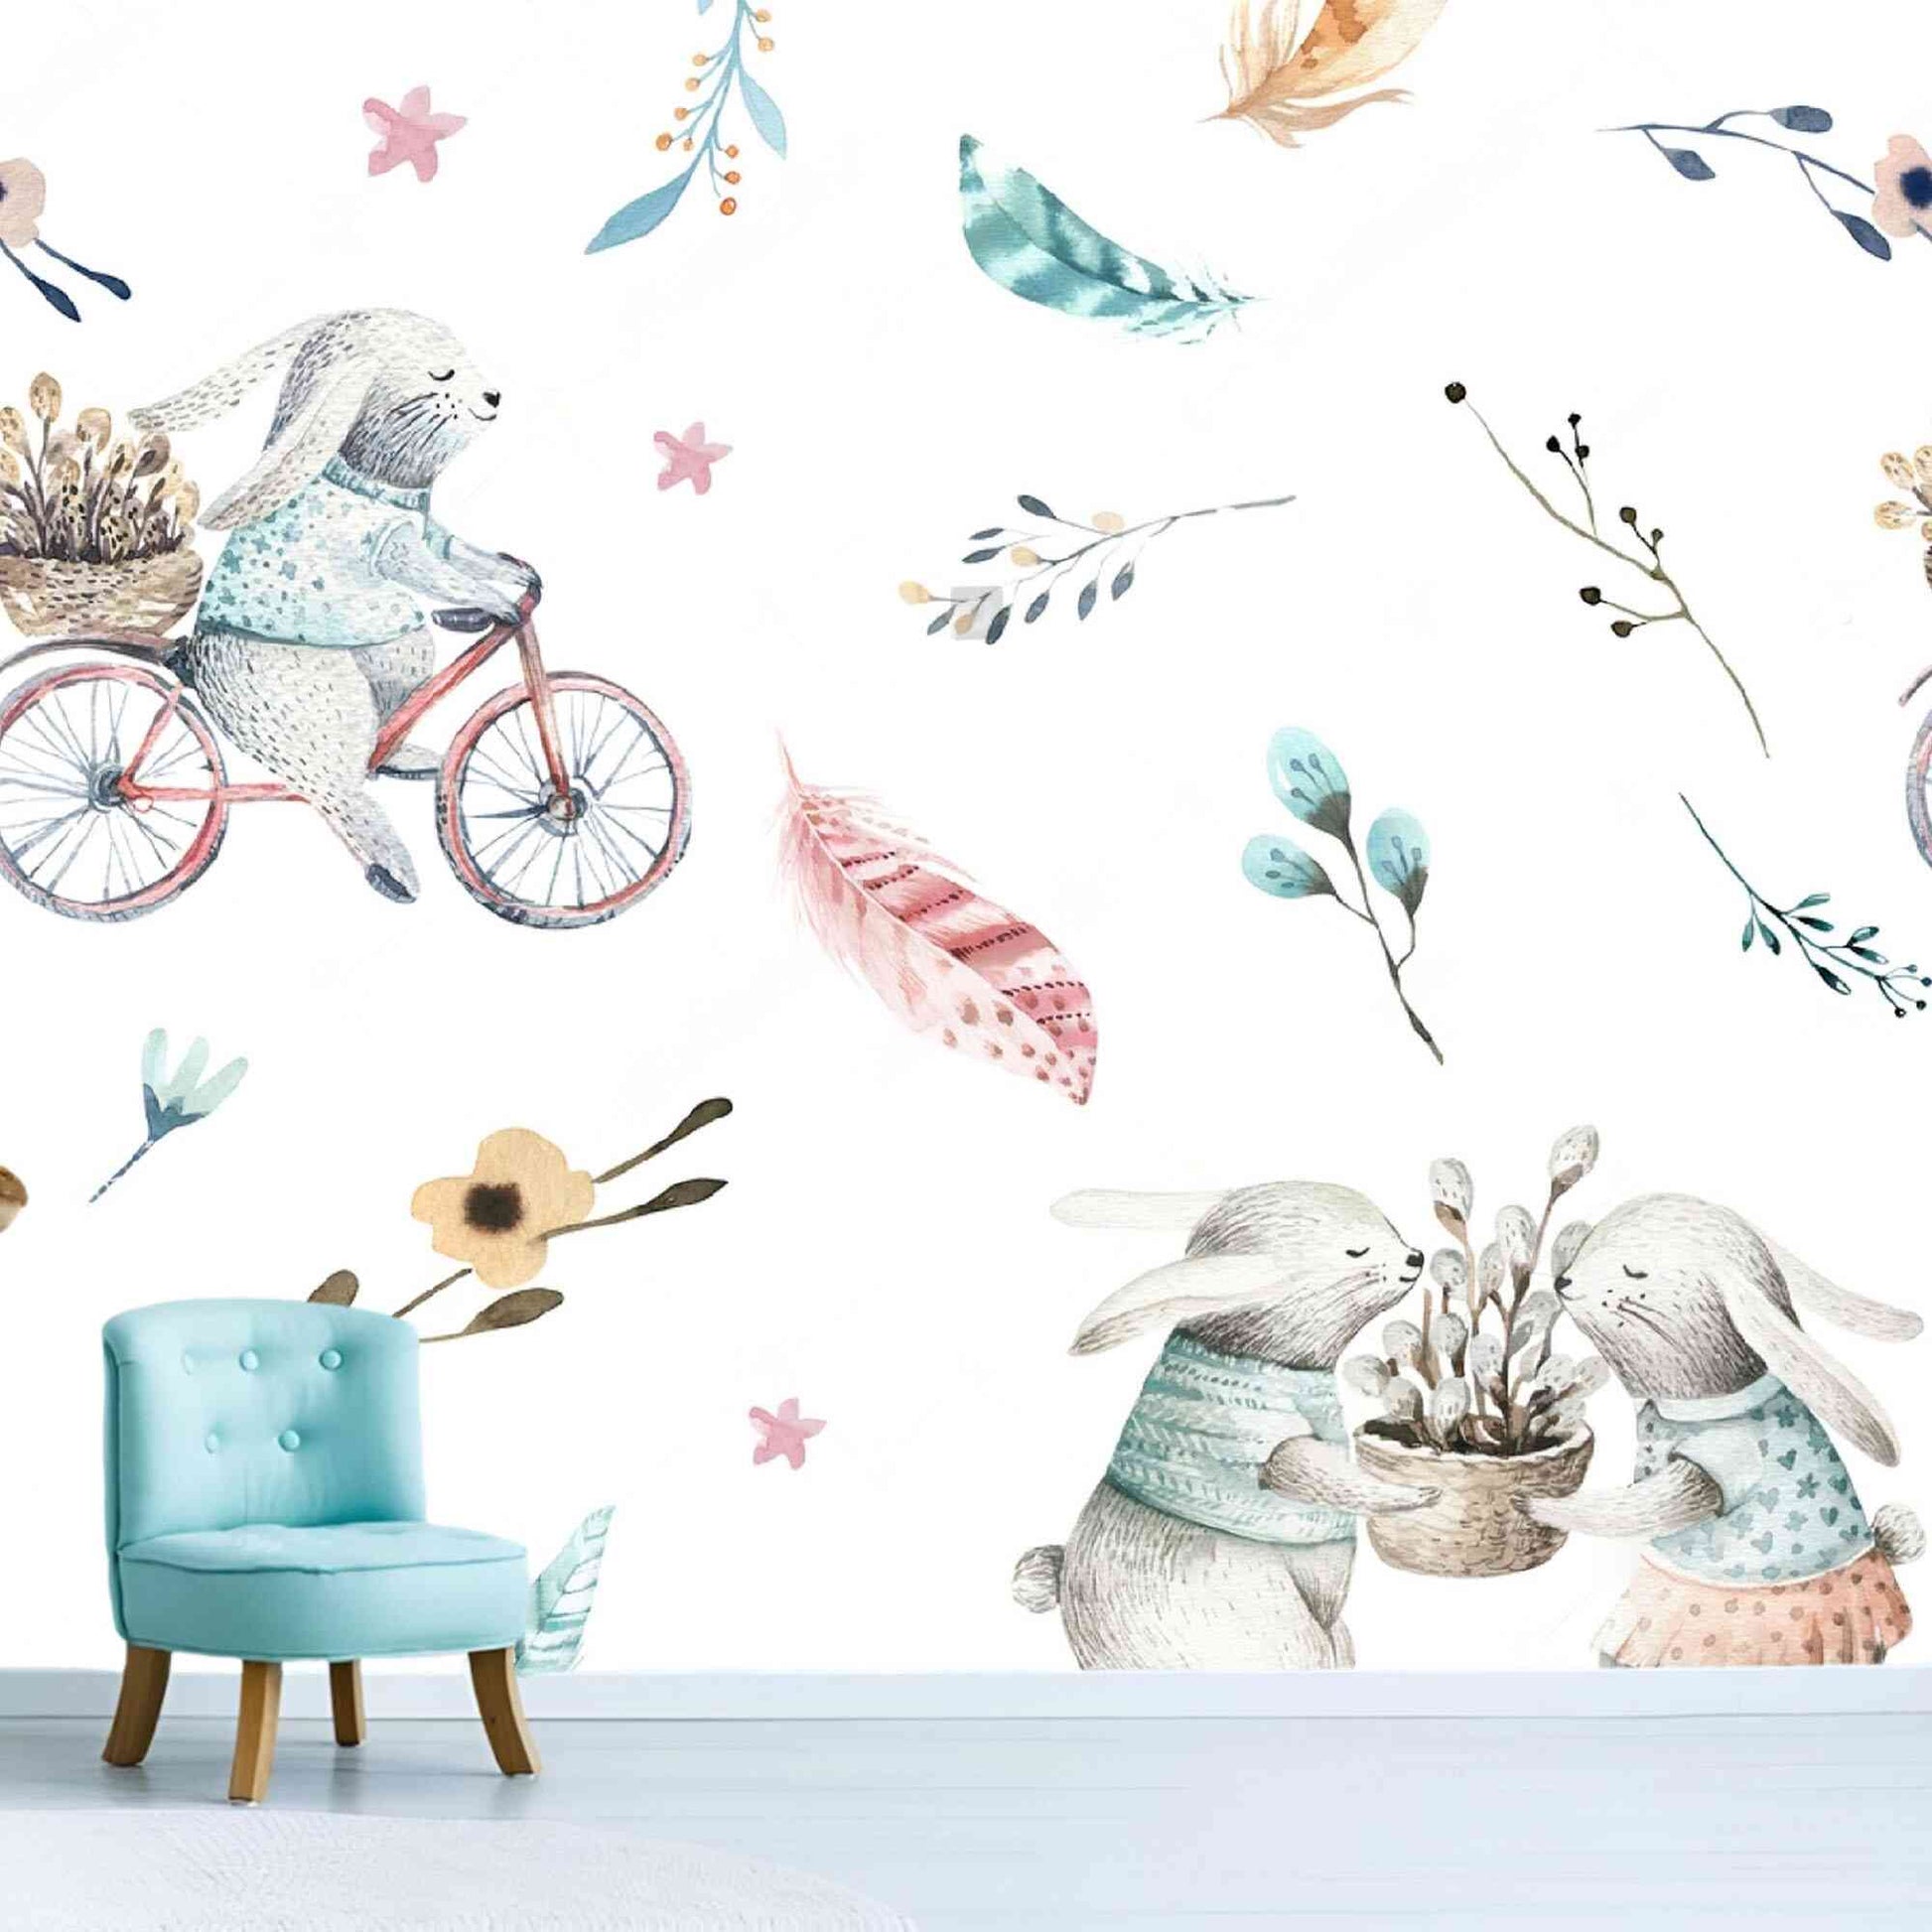 Adorable and playful bunnies bring charm and whimsy to your walls - Rabbit Mural Wallpaper